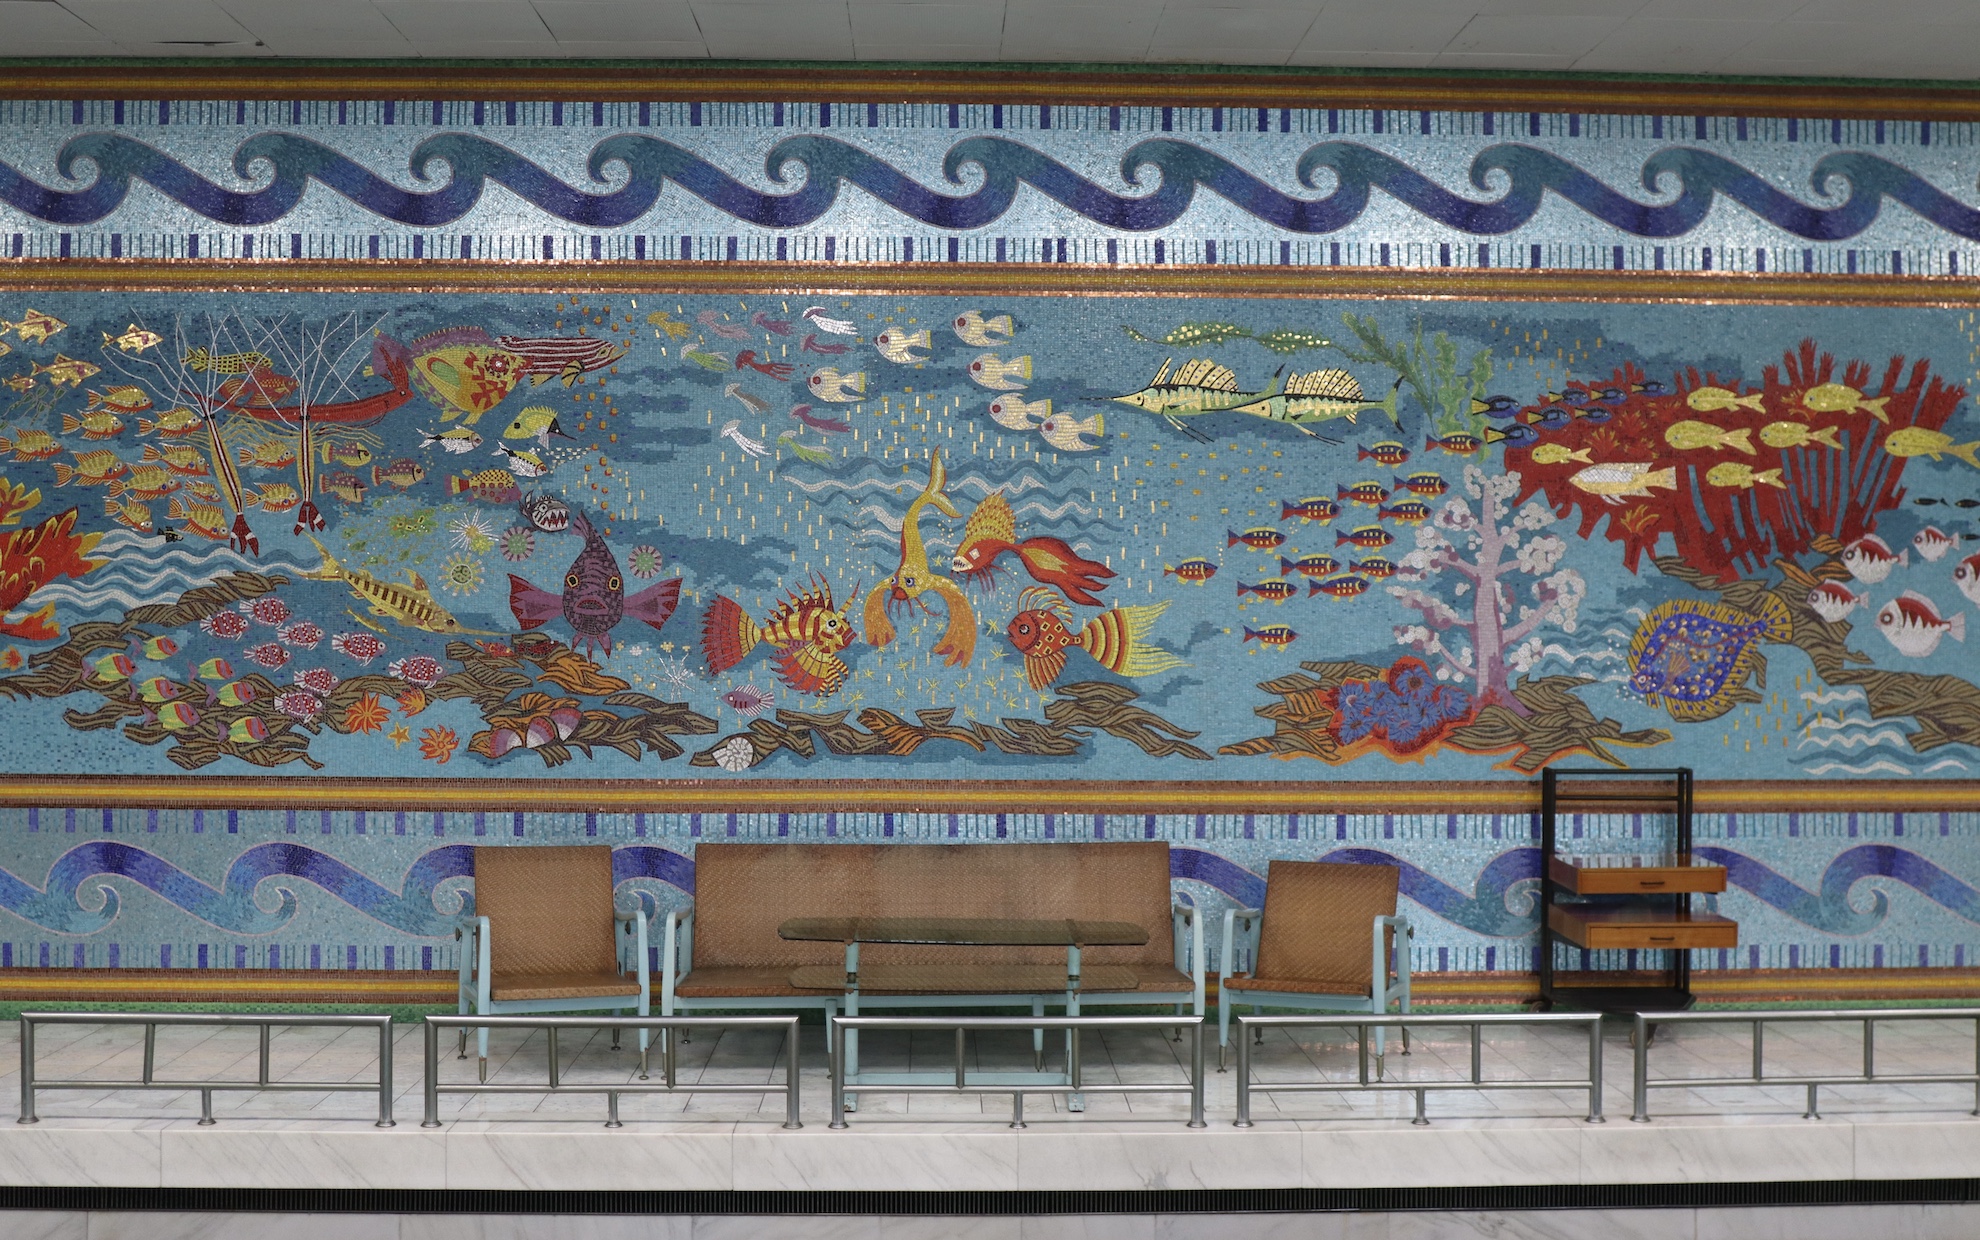 Mural in the pool room of Ceaușescu’s mansion